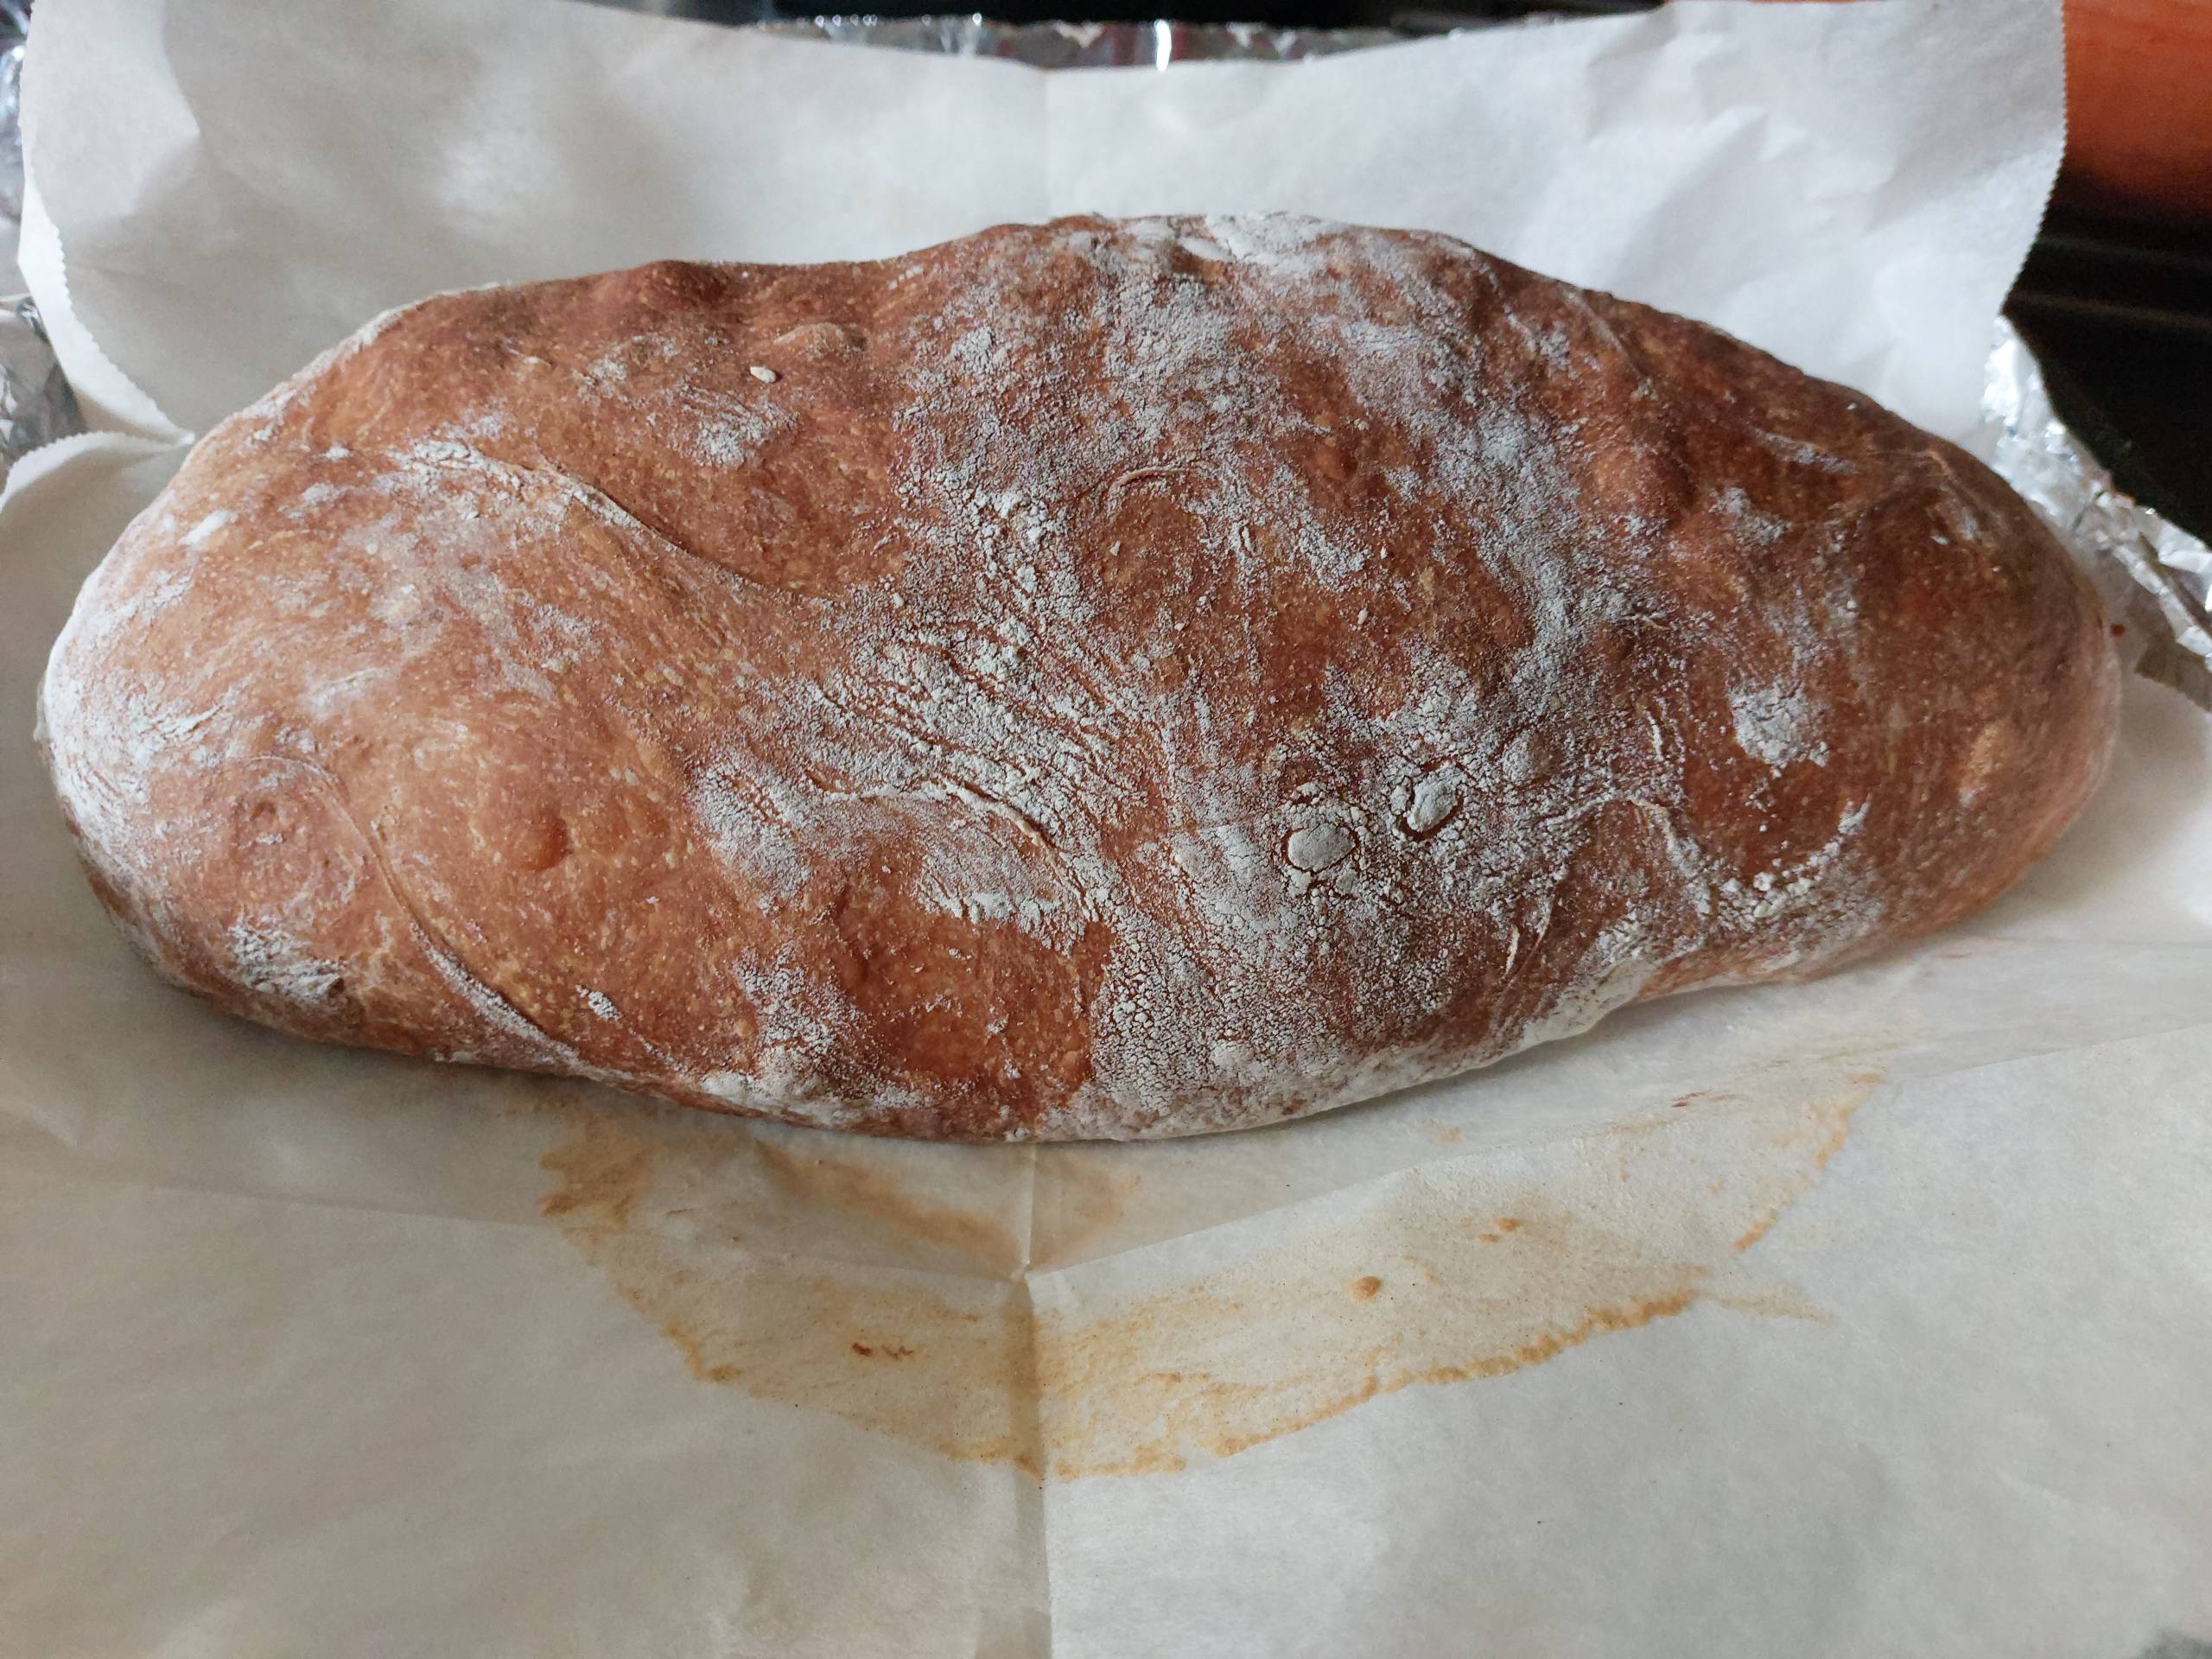 Pain de Campagne is a traditional French bread